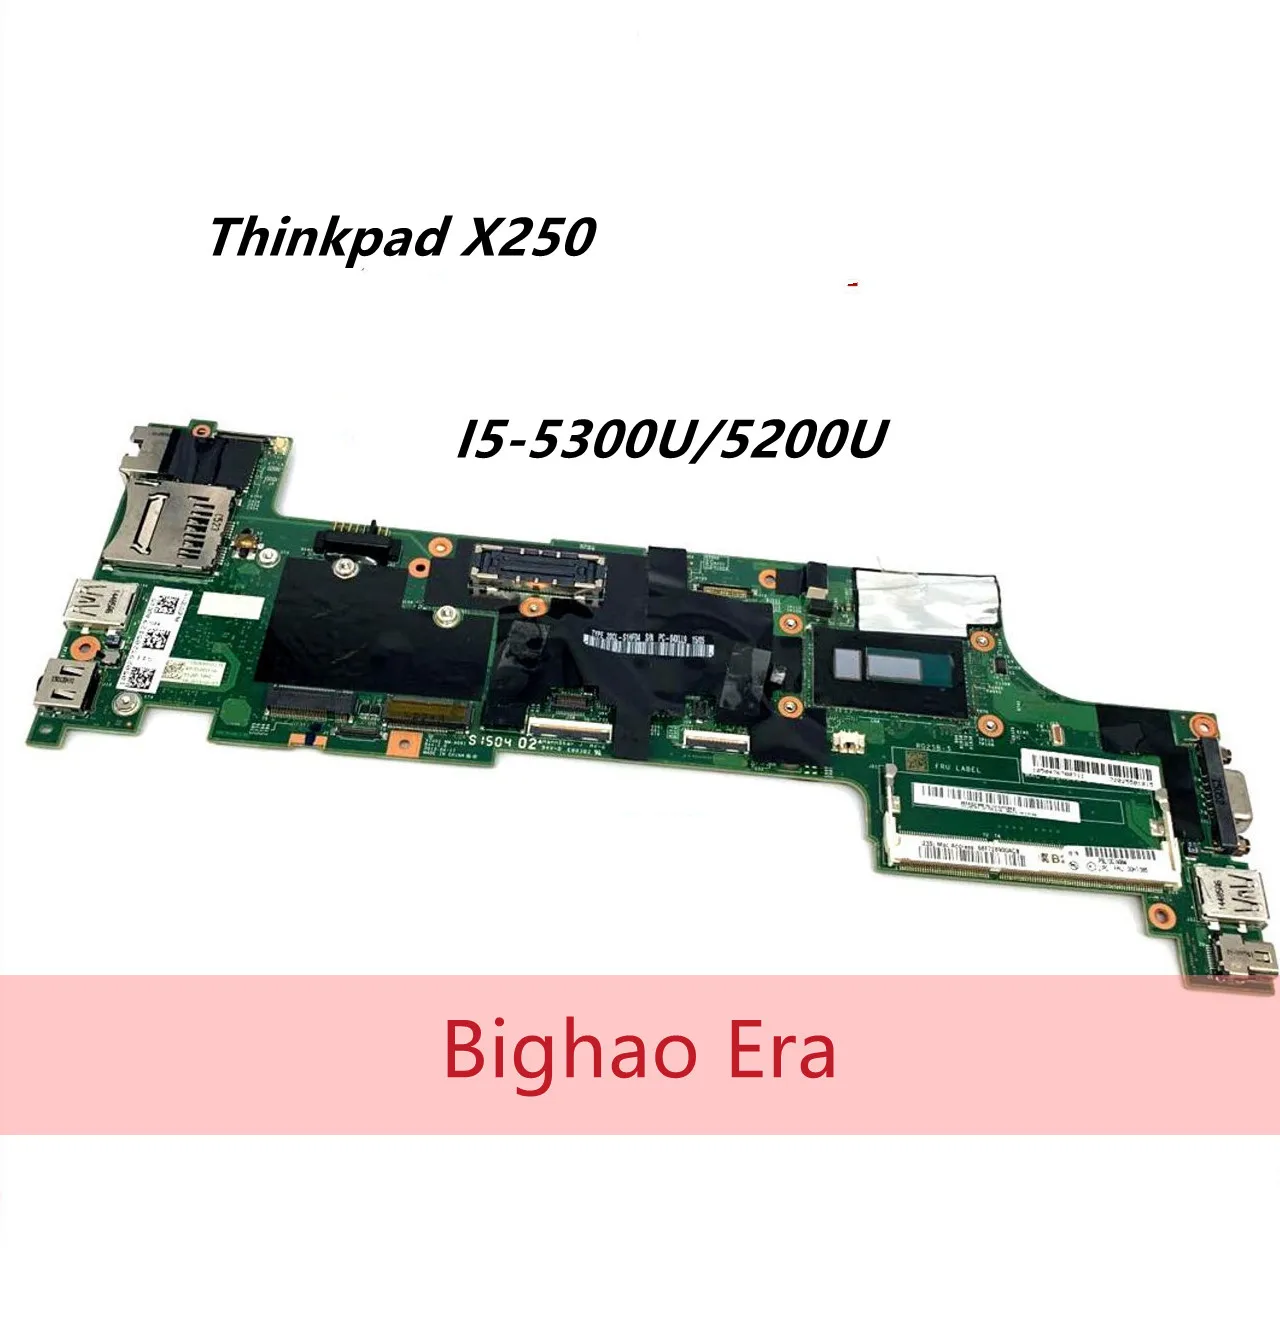 

00HT369 00HT373 00HT374 00HT385 For Lenovo Thinkpad X250 Laptop motherboard NM-A091 with CPU i5 5300U/5200U DDR3 100% test work